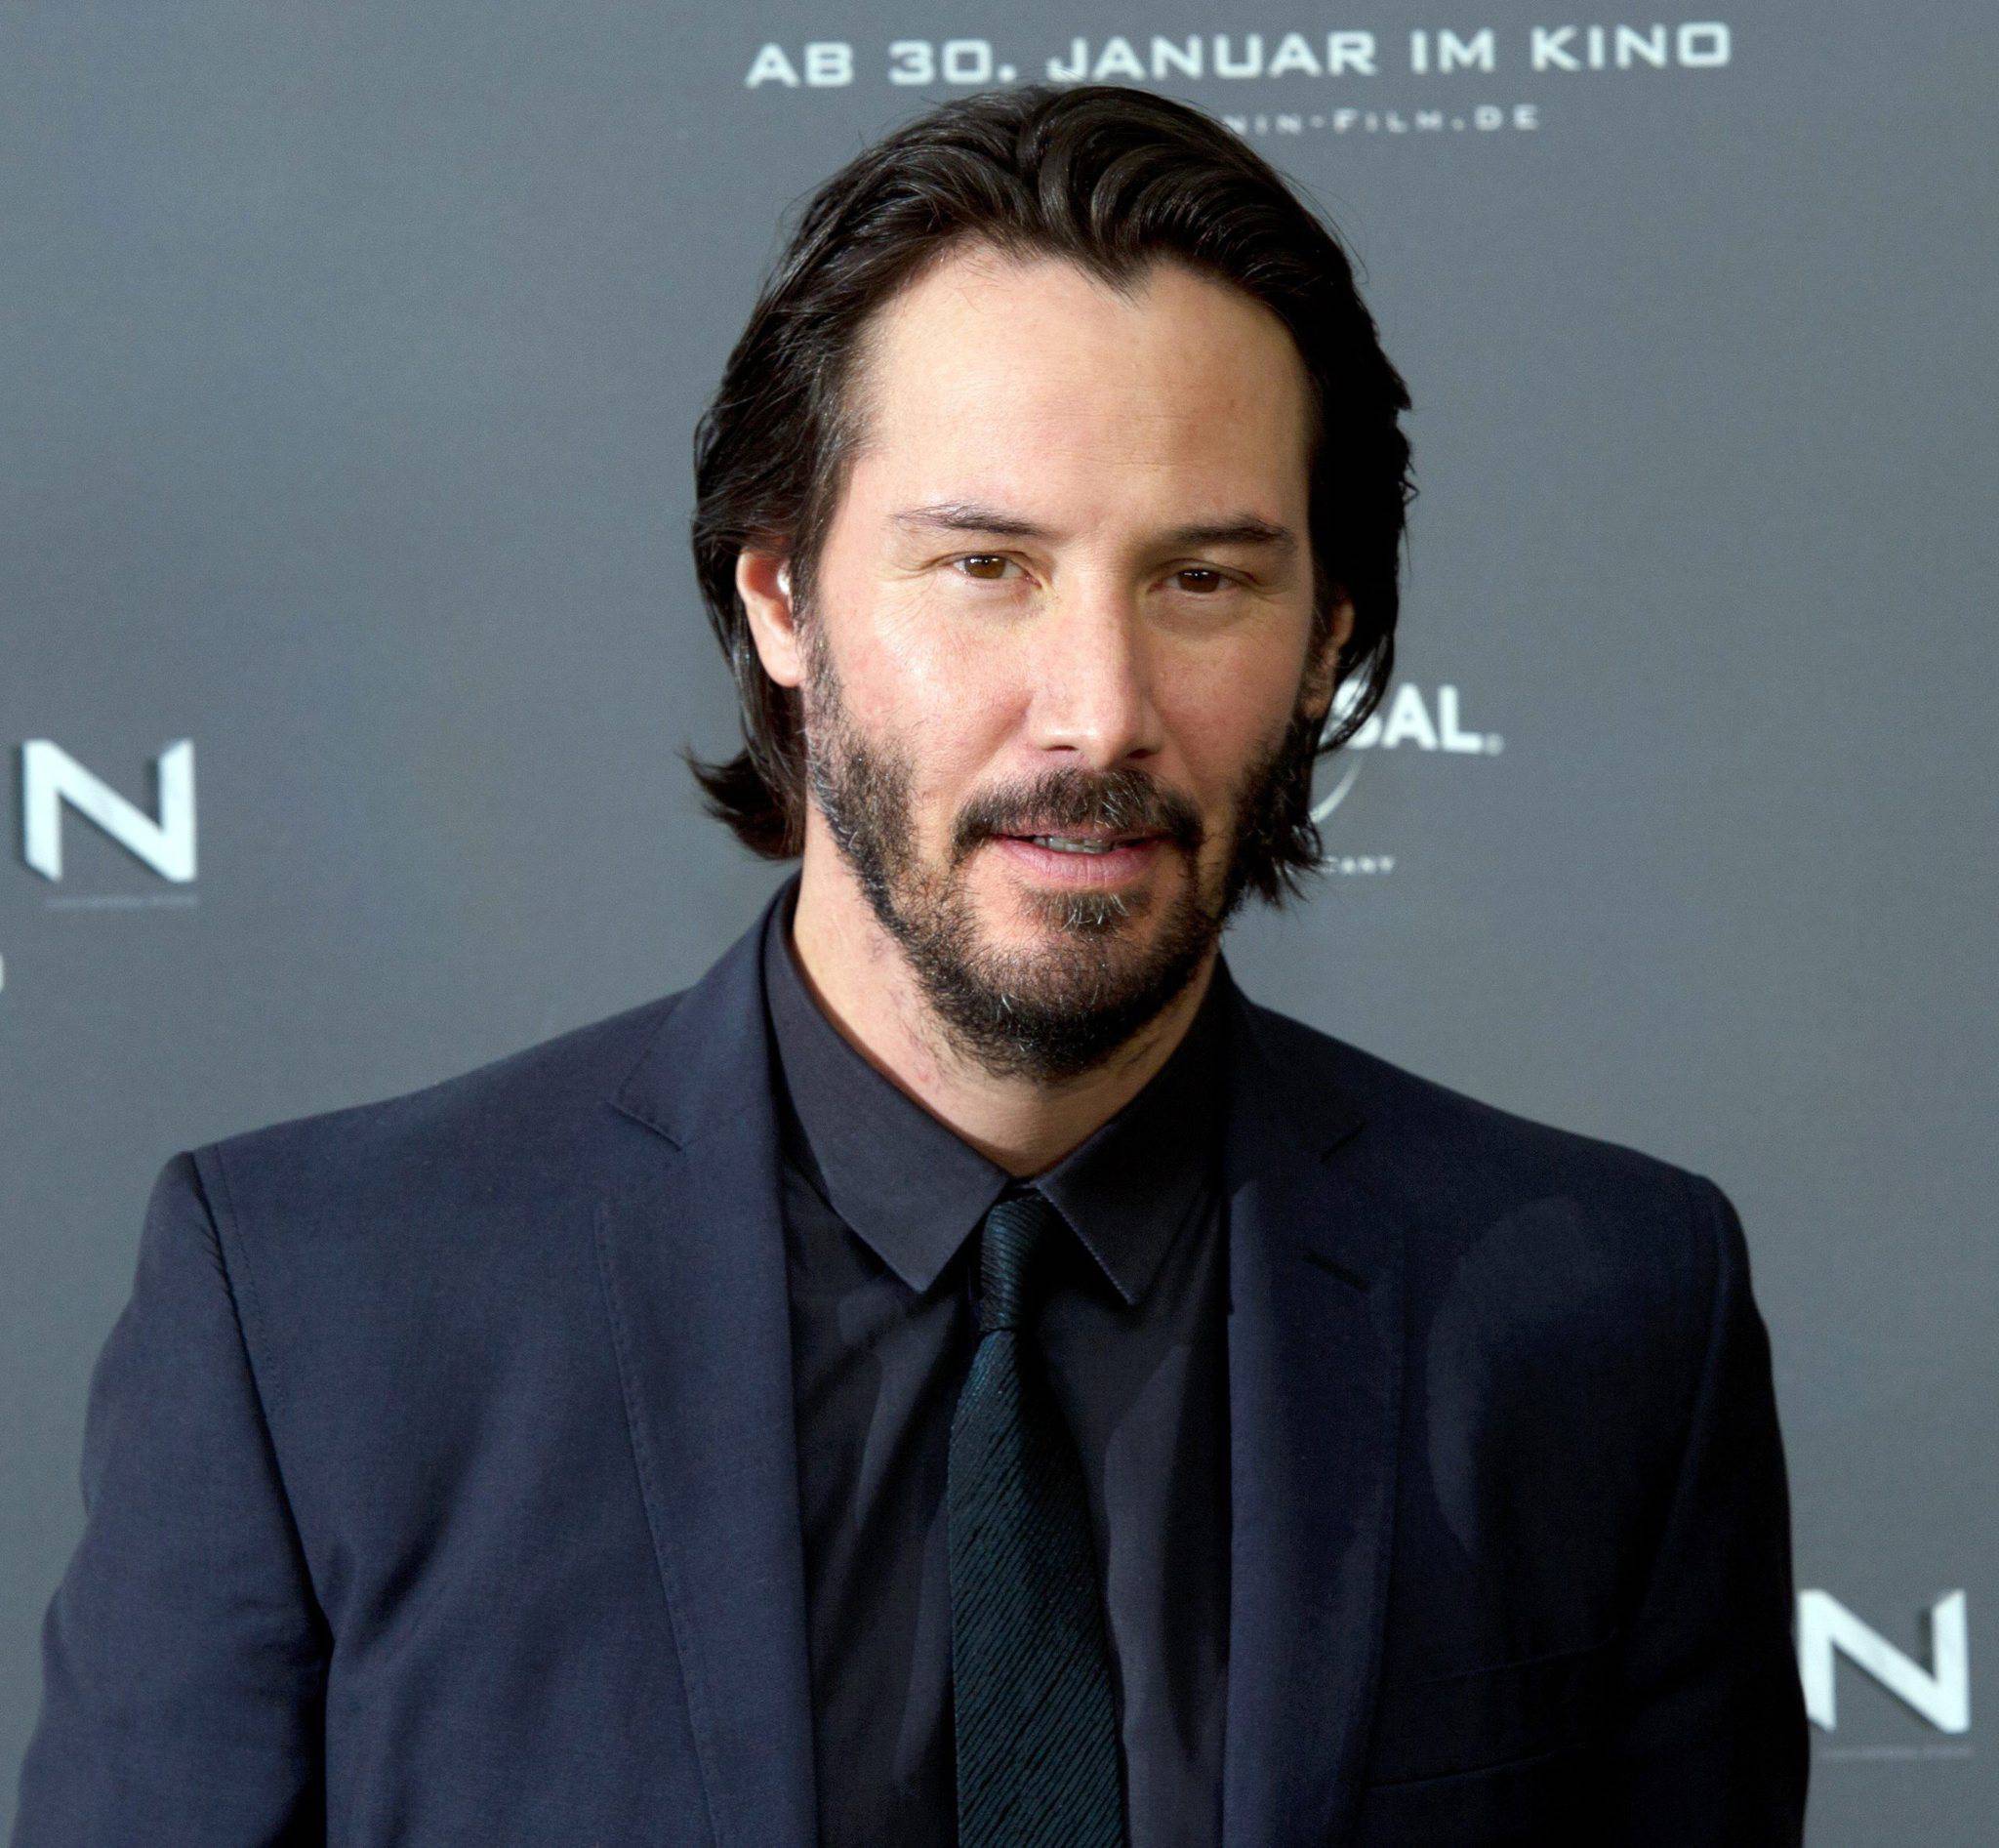 epa04367538 (FILE) The file picture dated 17 January 2014 shows US actor/cast member Keanu Reeves as he attends a photocall for '47 Ronin' in Munich, Germany. Keanu Reeves will turn 50 on 02 September 2014.  EPA/TOBIAS HASE ** Usable by LA, CT and MoD ONLY **